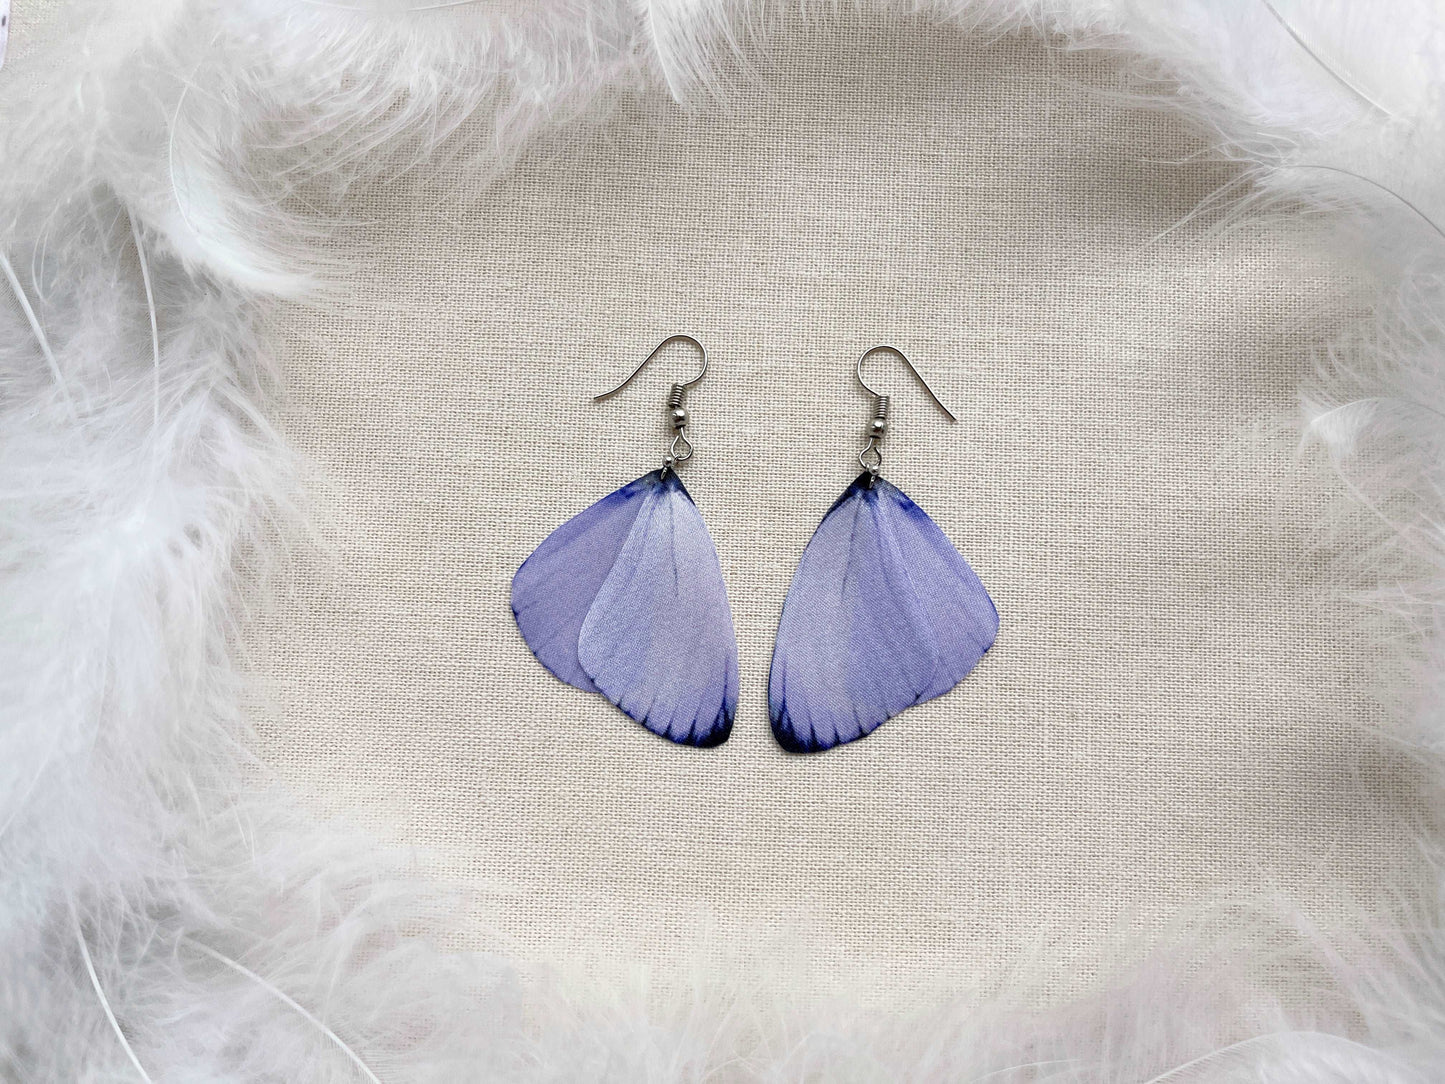 Lilac butterfly earrings with threader - whimsical and fun jewelry